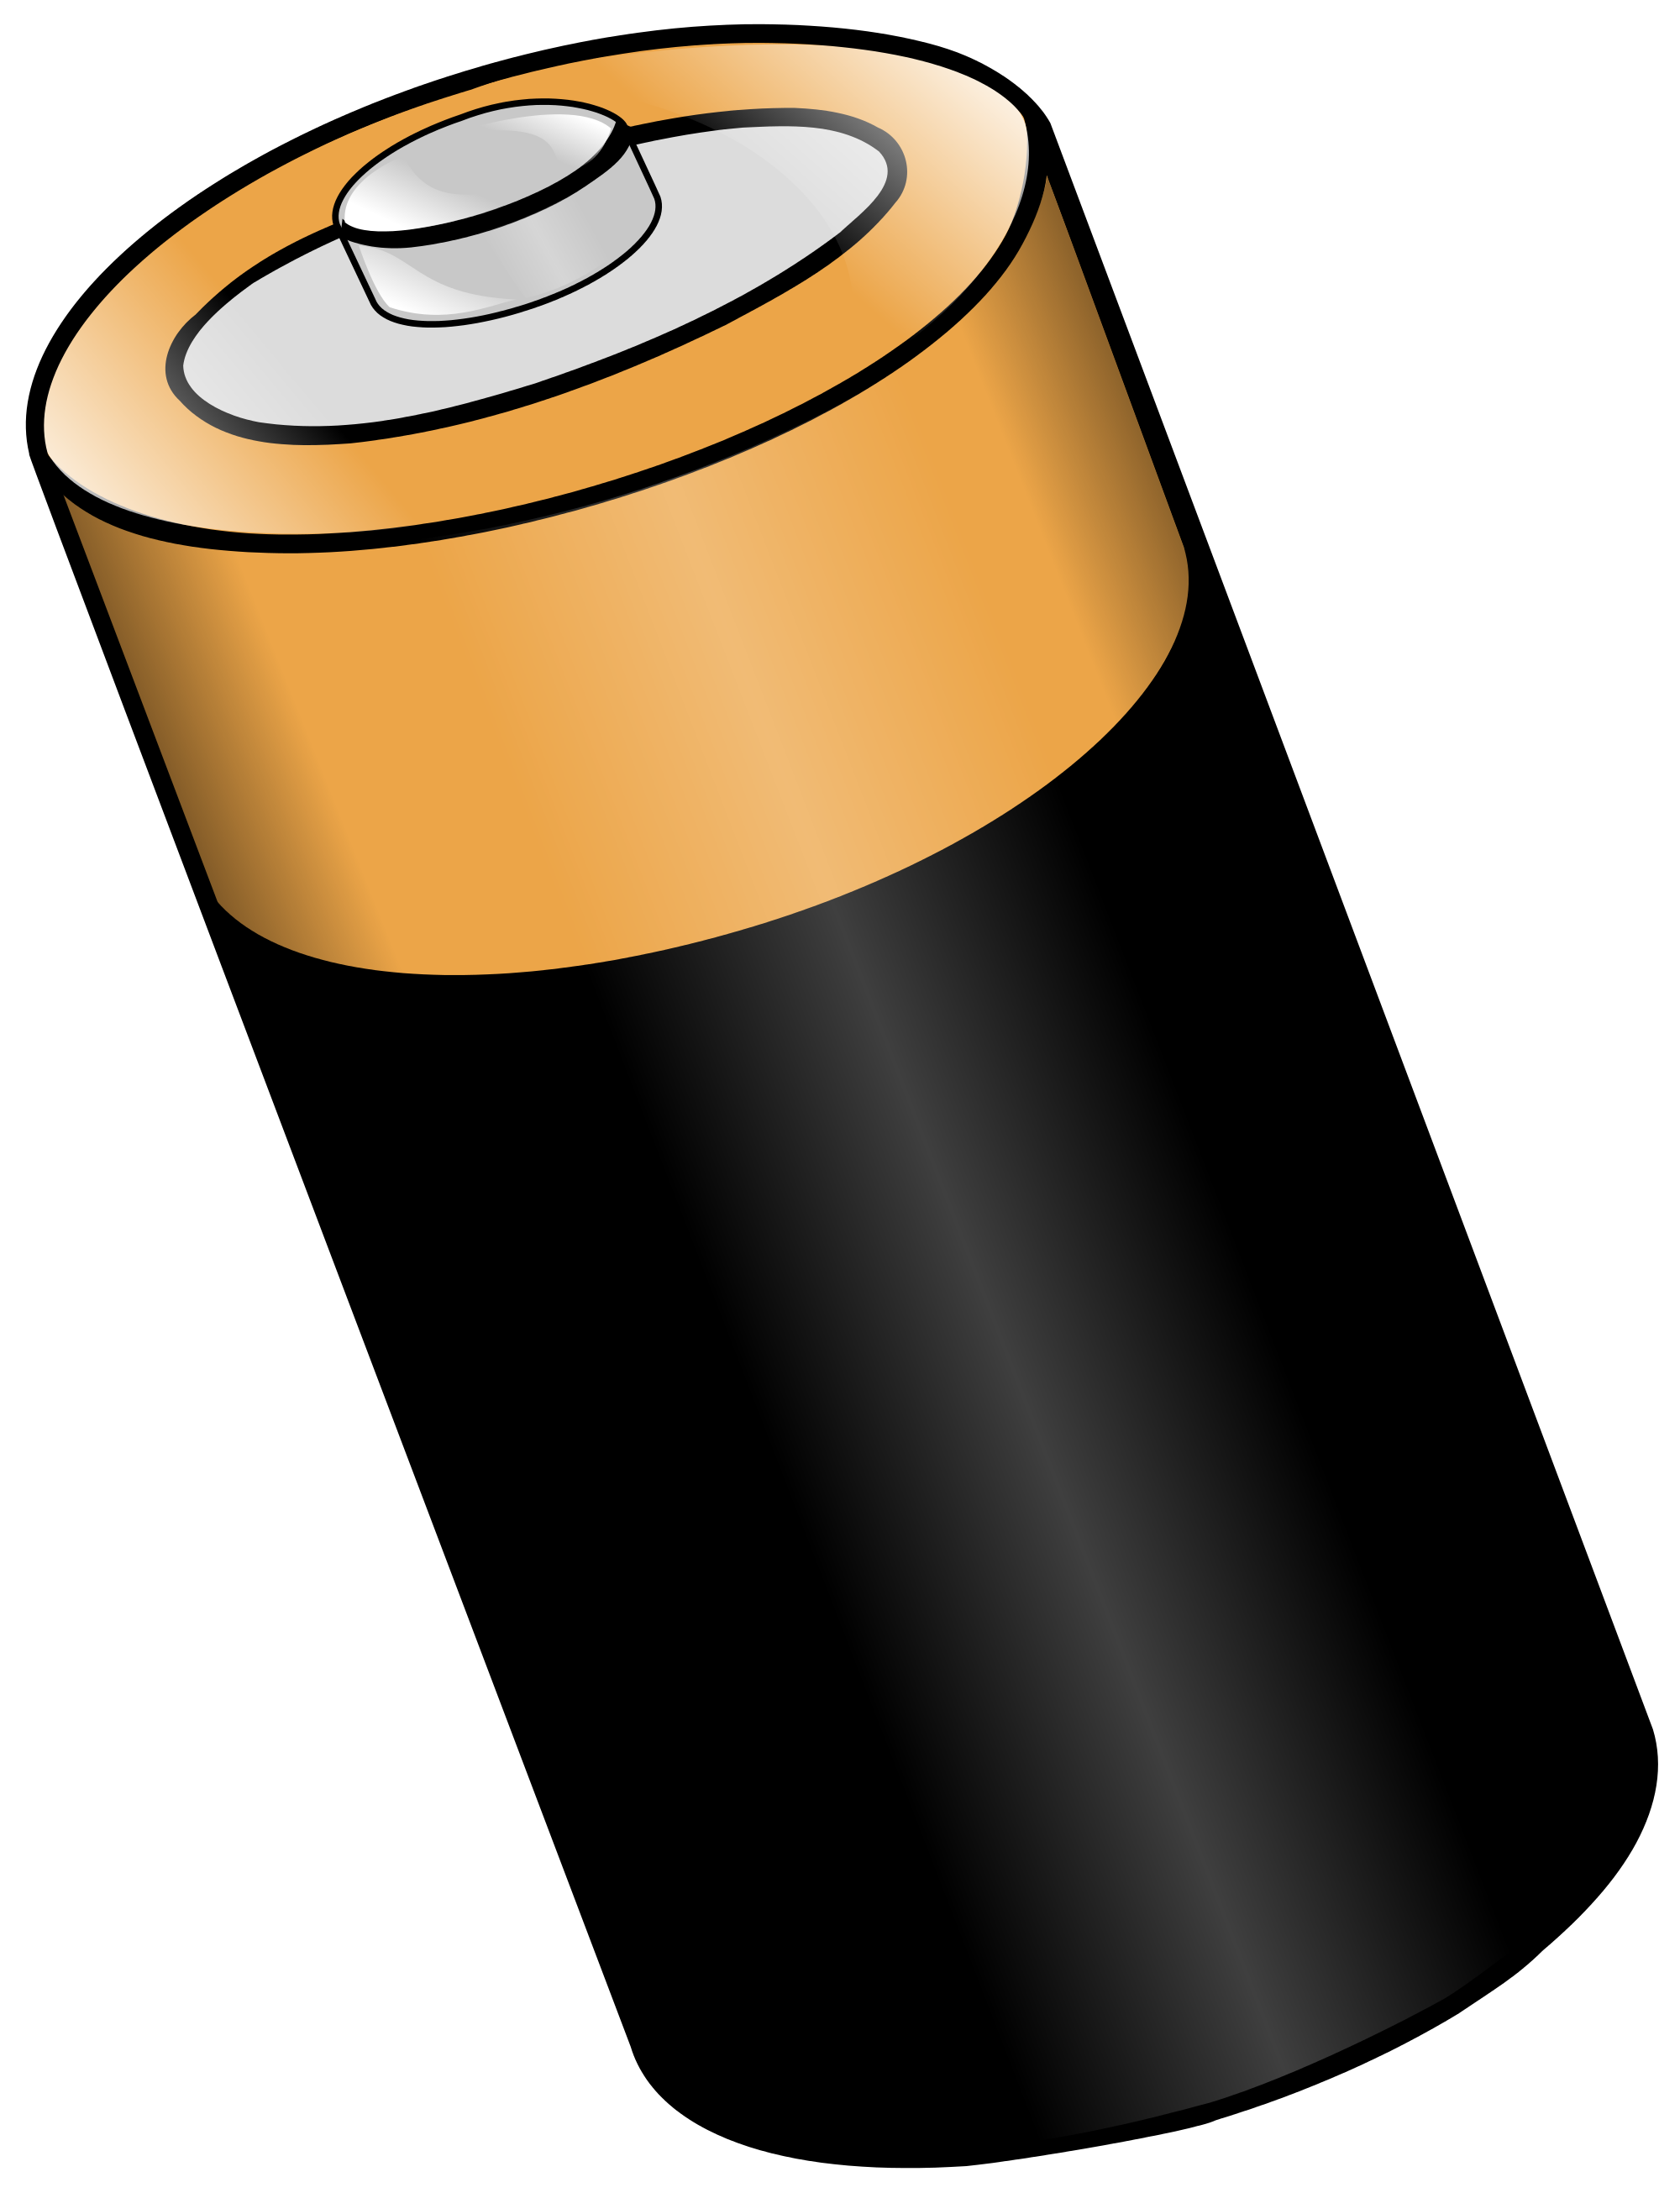 Battery Cell Pic Free Download Image PNG Image